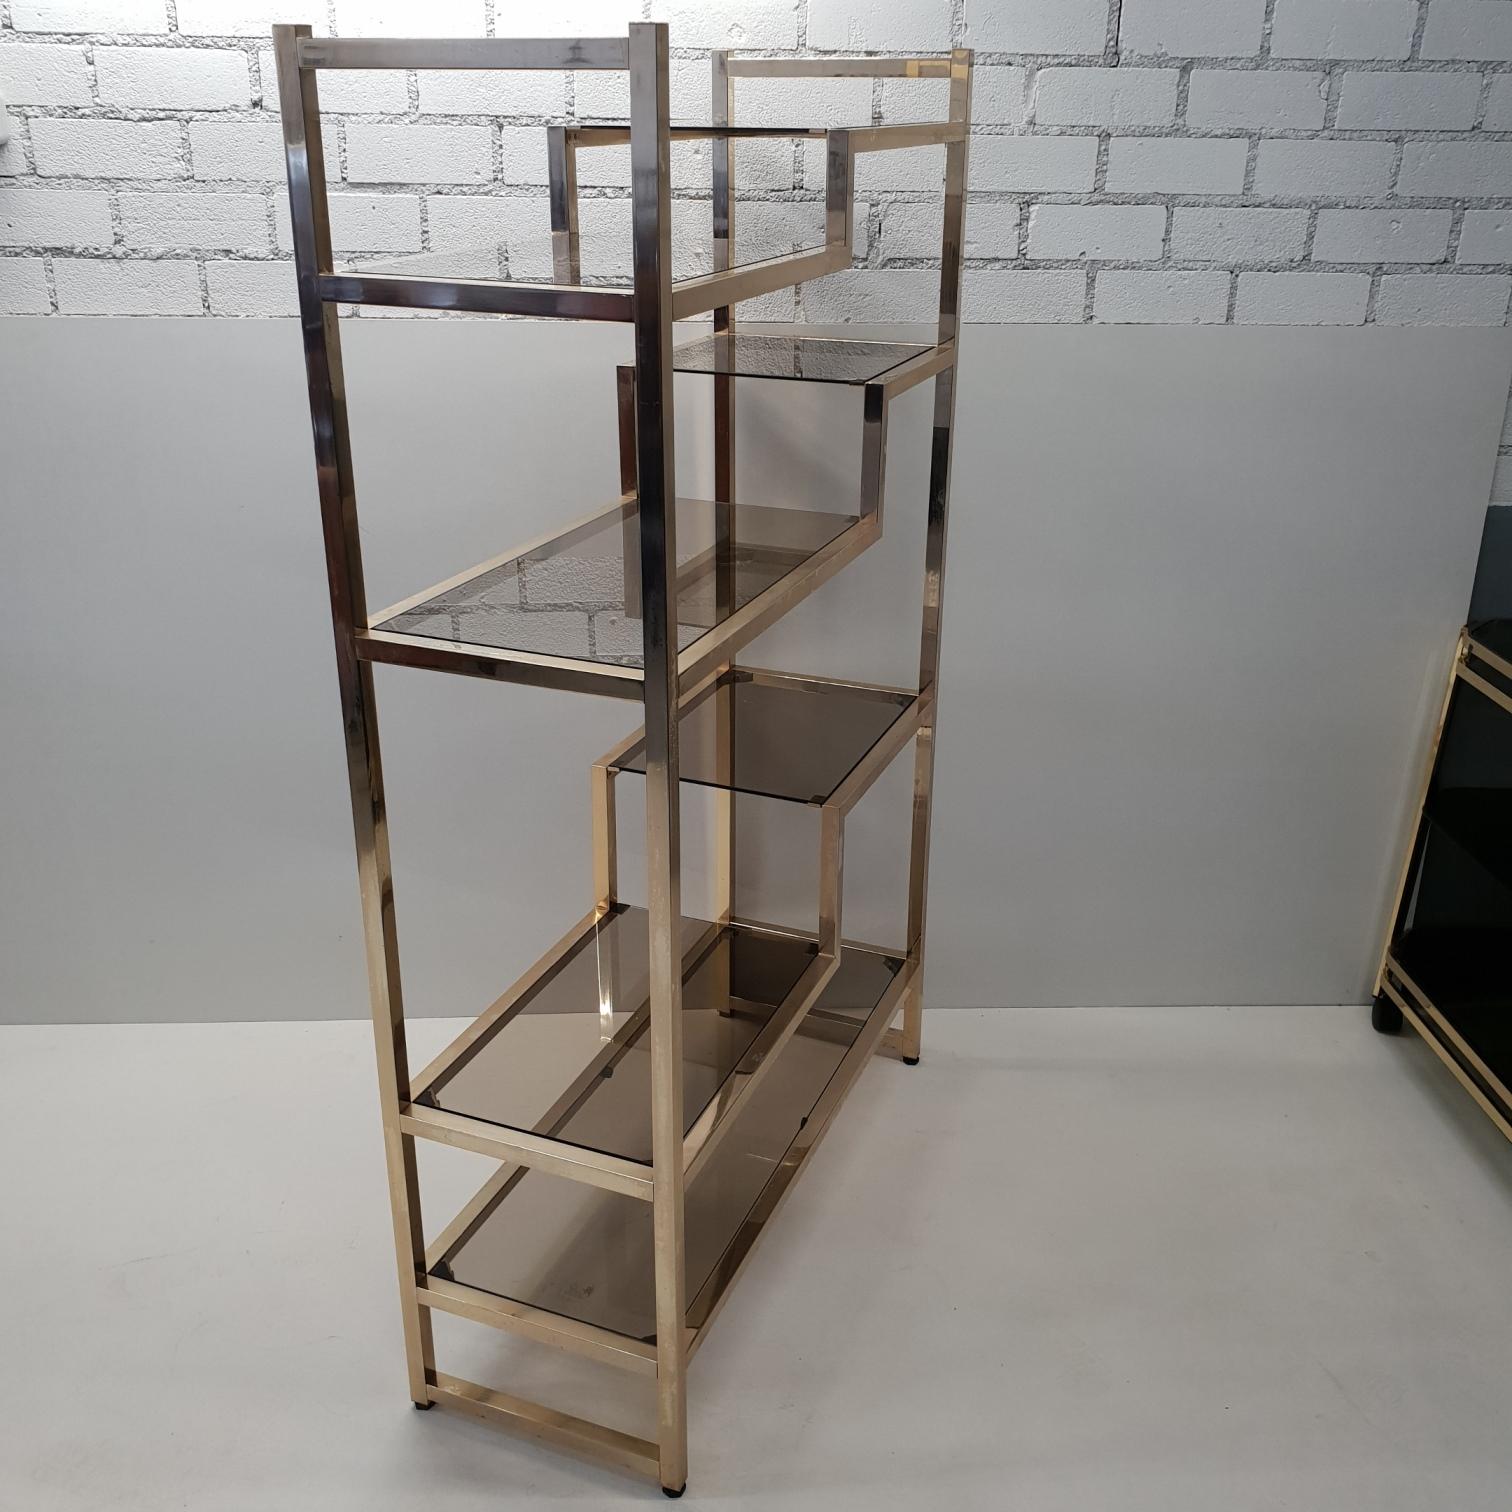 Brass shelving unit etagère with smoked glass.
With adjustable feet under the frame.
Italian design from the 1970s.
In style of Willy Rizzo, Romeo Rega.